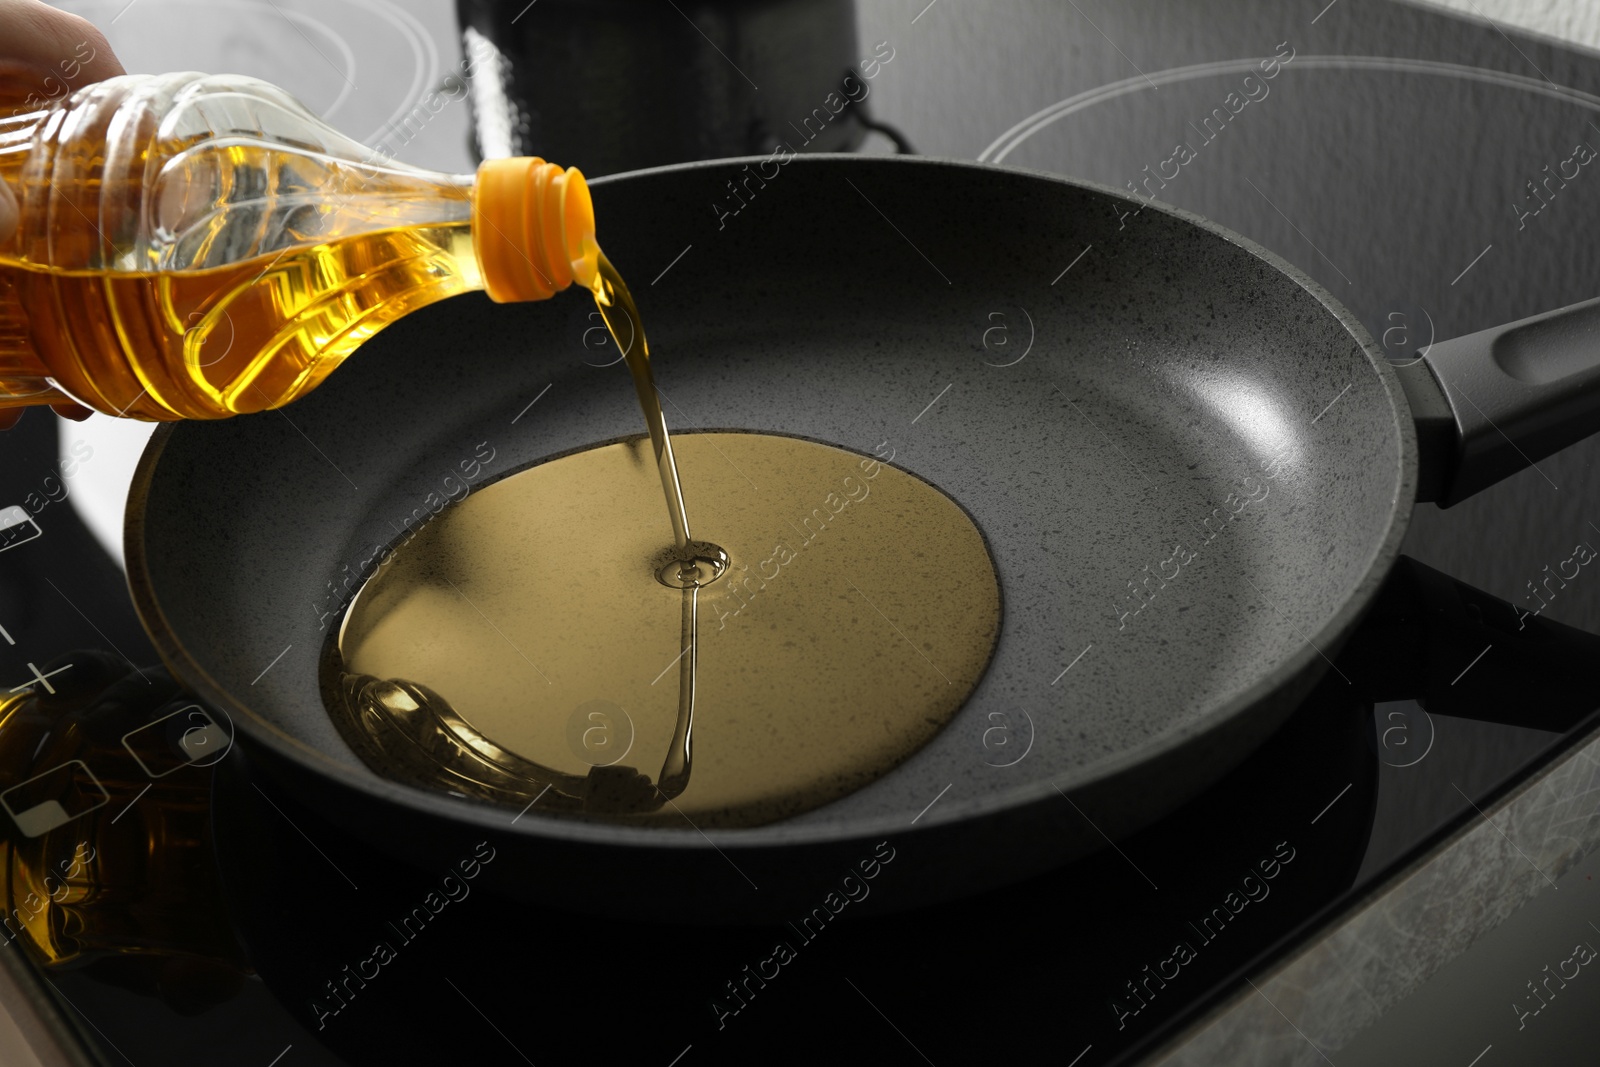 Photo of Woman pouring cooking oil from bottle into frying pan, closeup